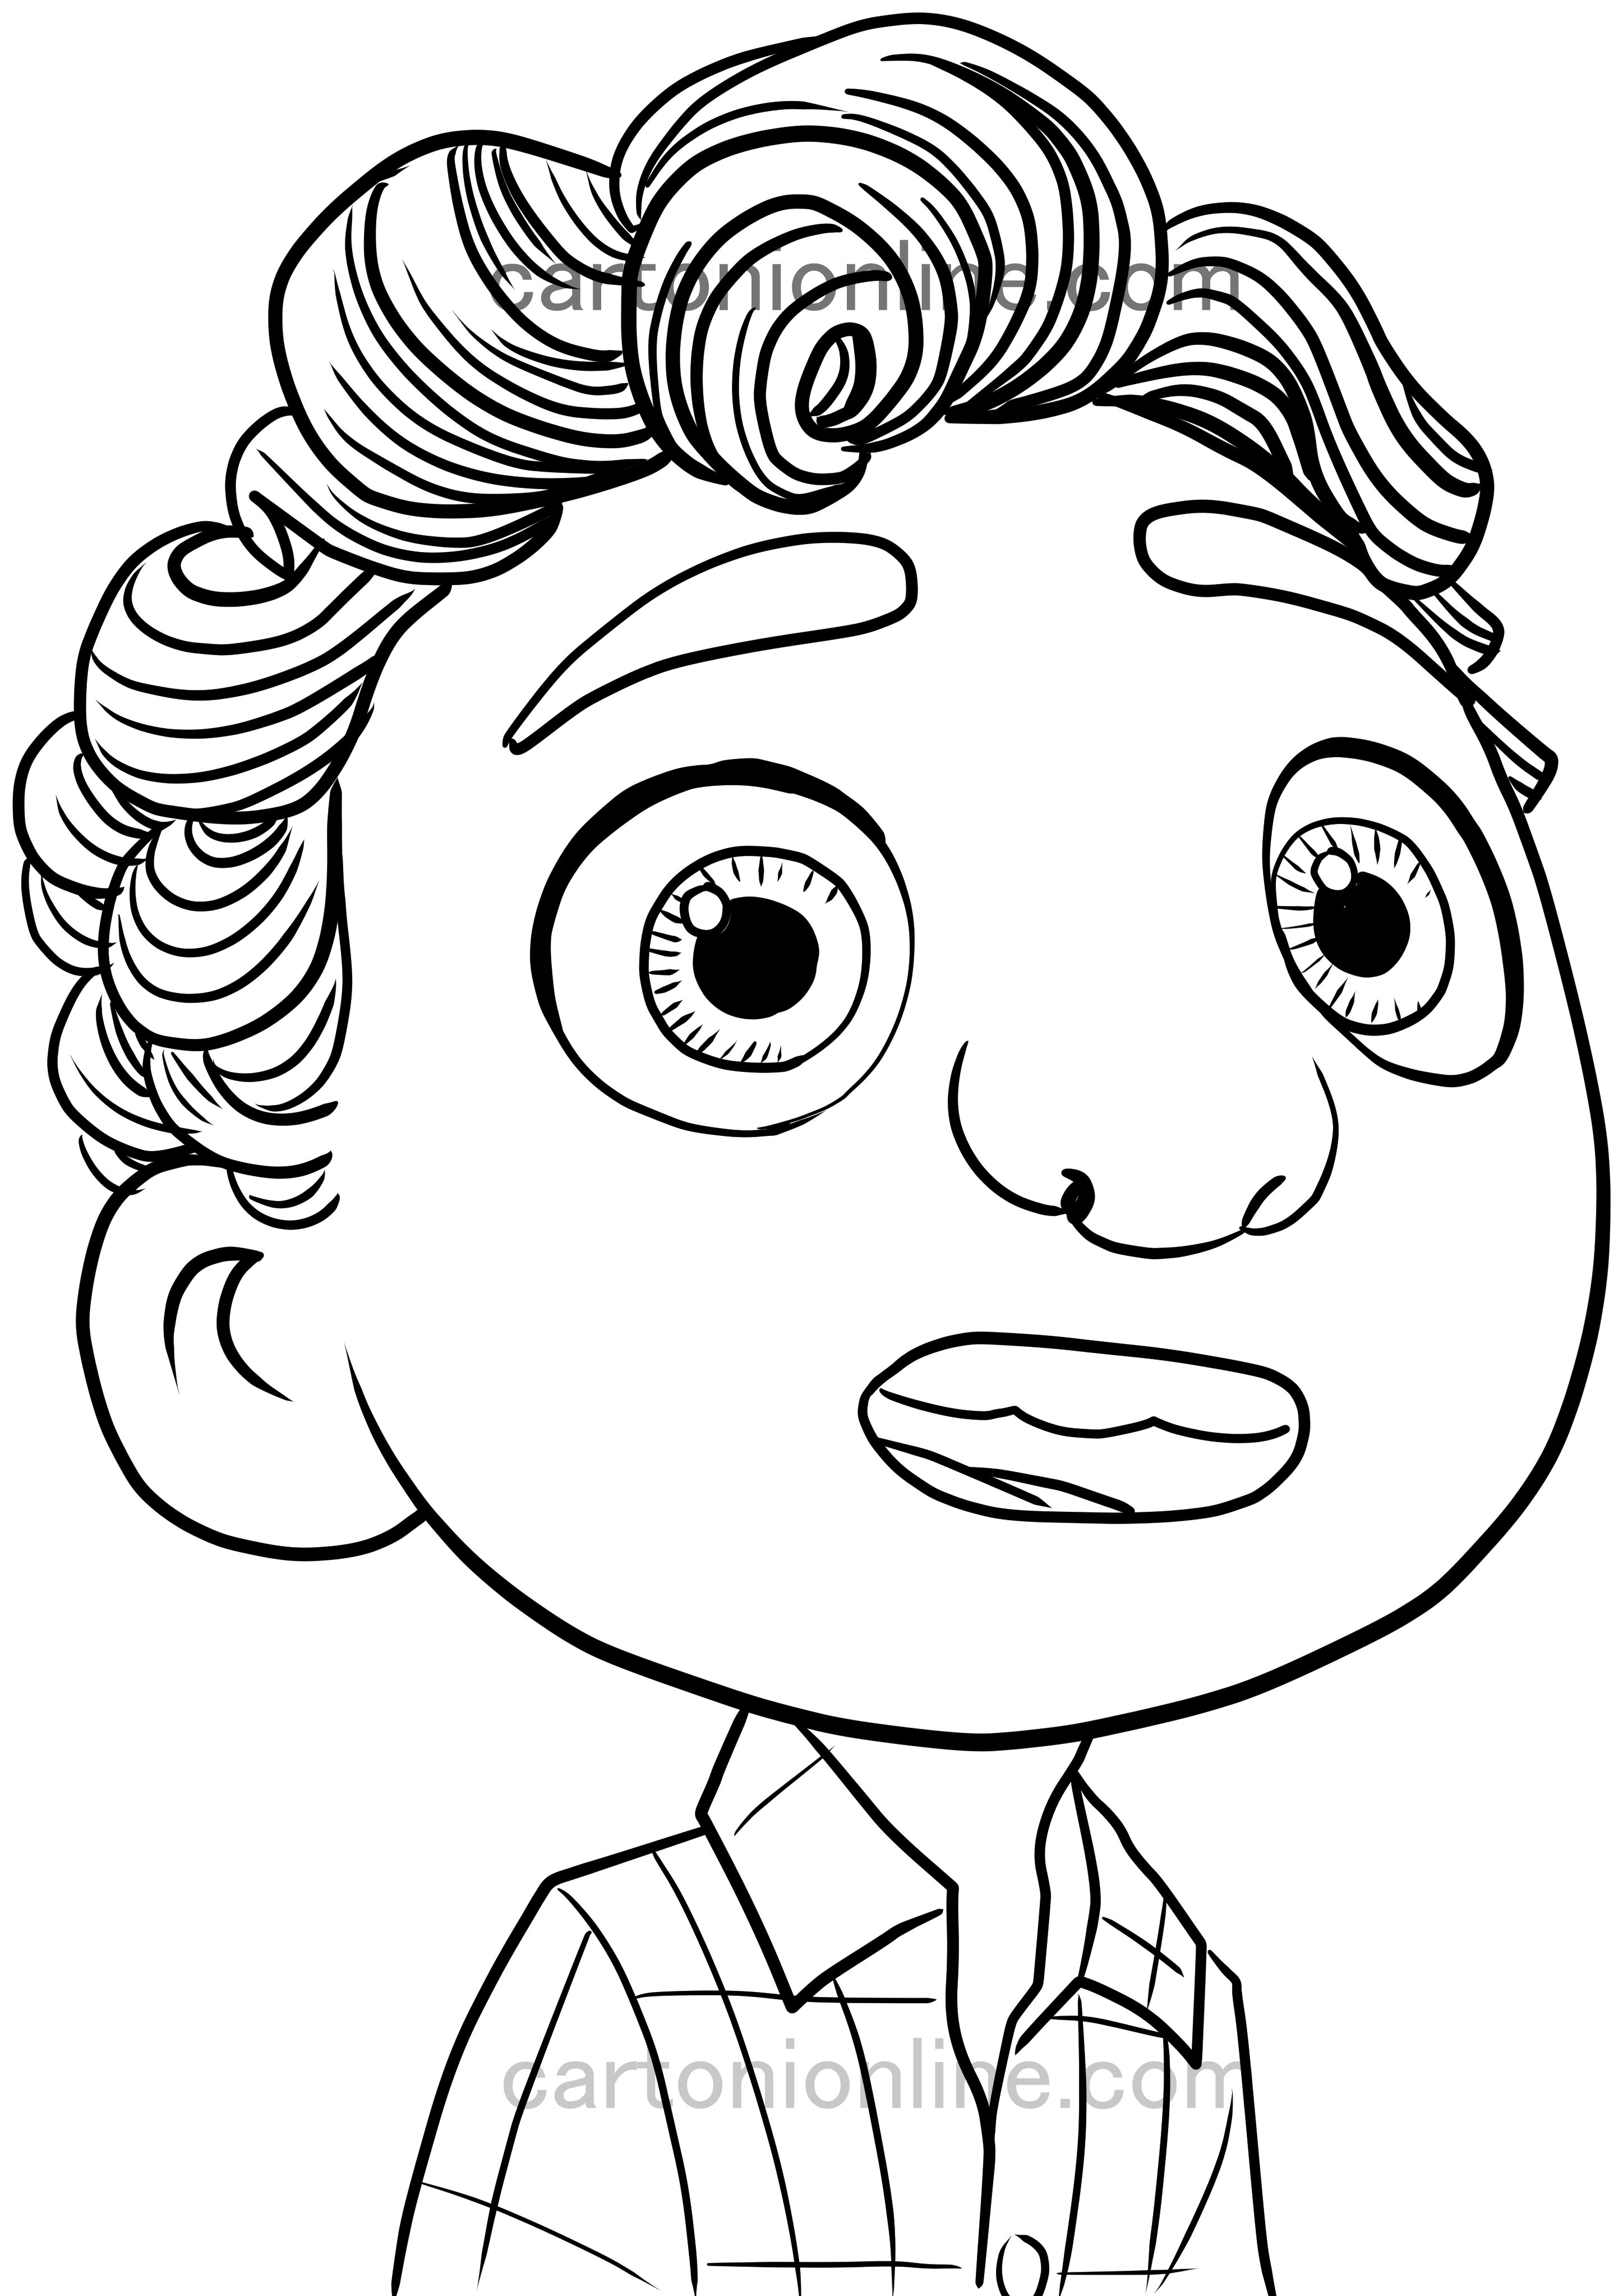 Luca Paguro from Luca the Disney Pixar movie coloring page to print and coloring